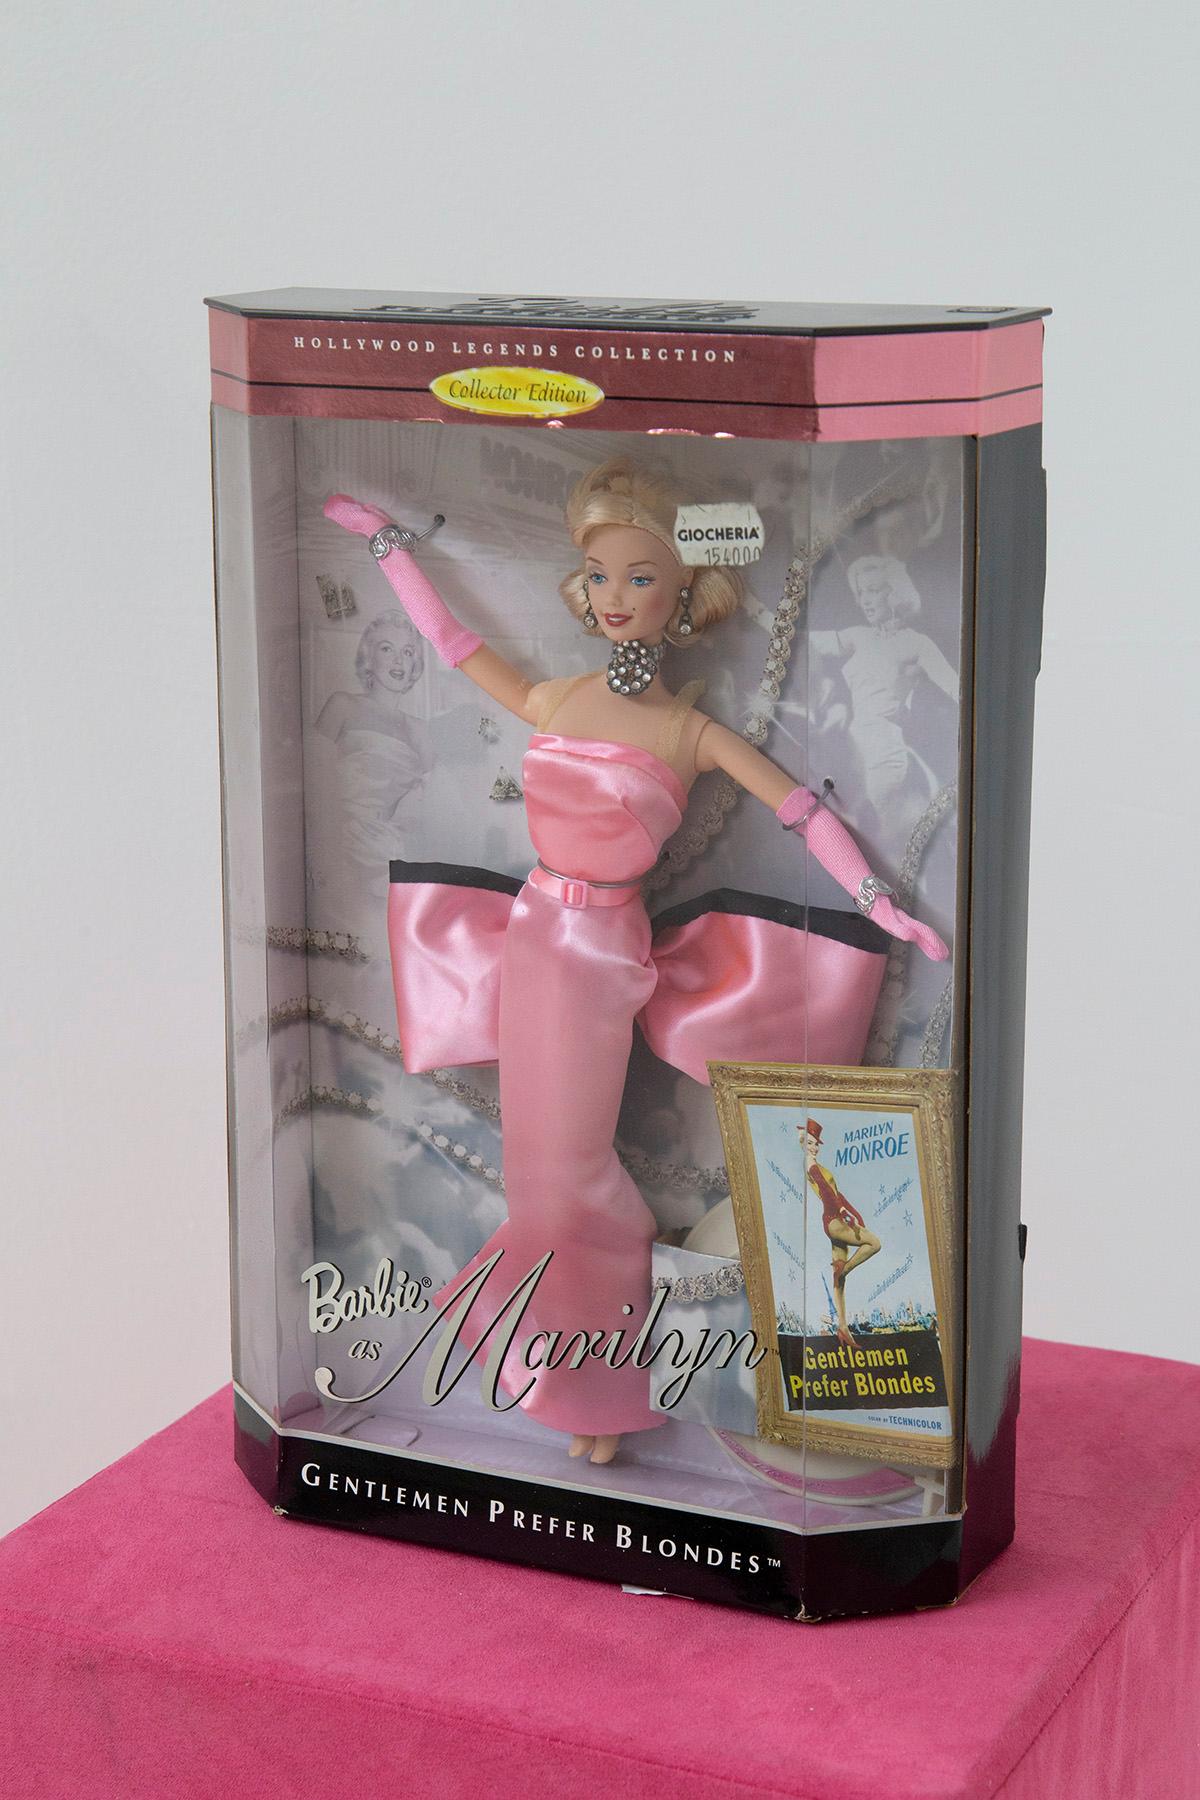 In the year 1997, a Barbie doll emerged from the depths of Hollywood's golden era to immortalize one of the most iconic moments in film history. She is none other than Barbie as Marilyn Monroe, a dazzling tribute to the legendary actress and her